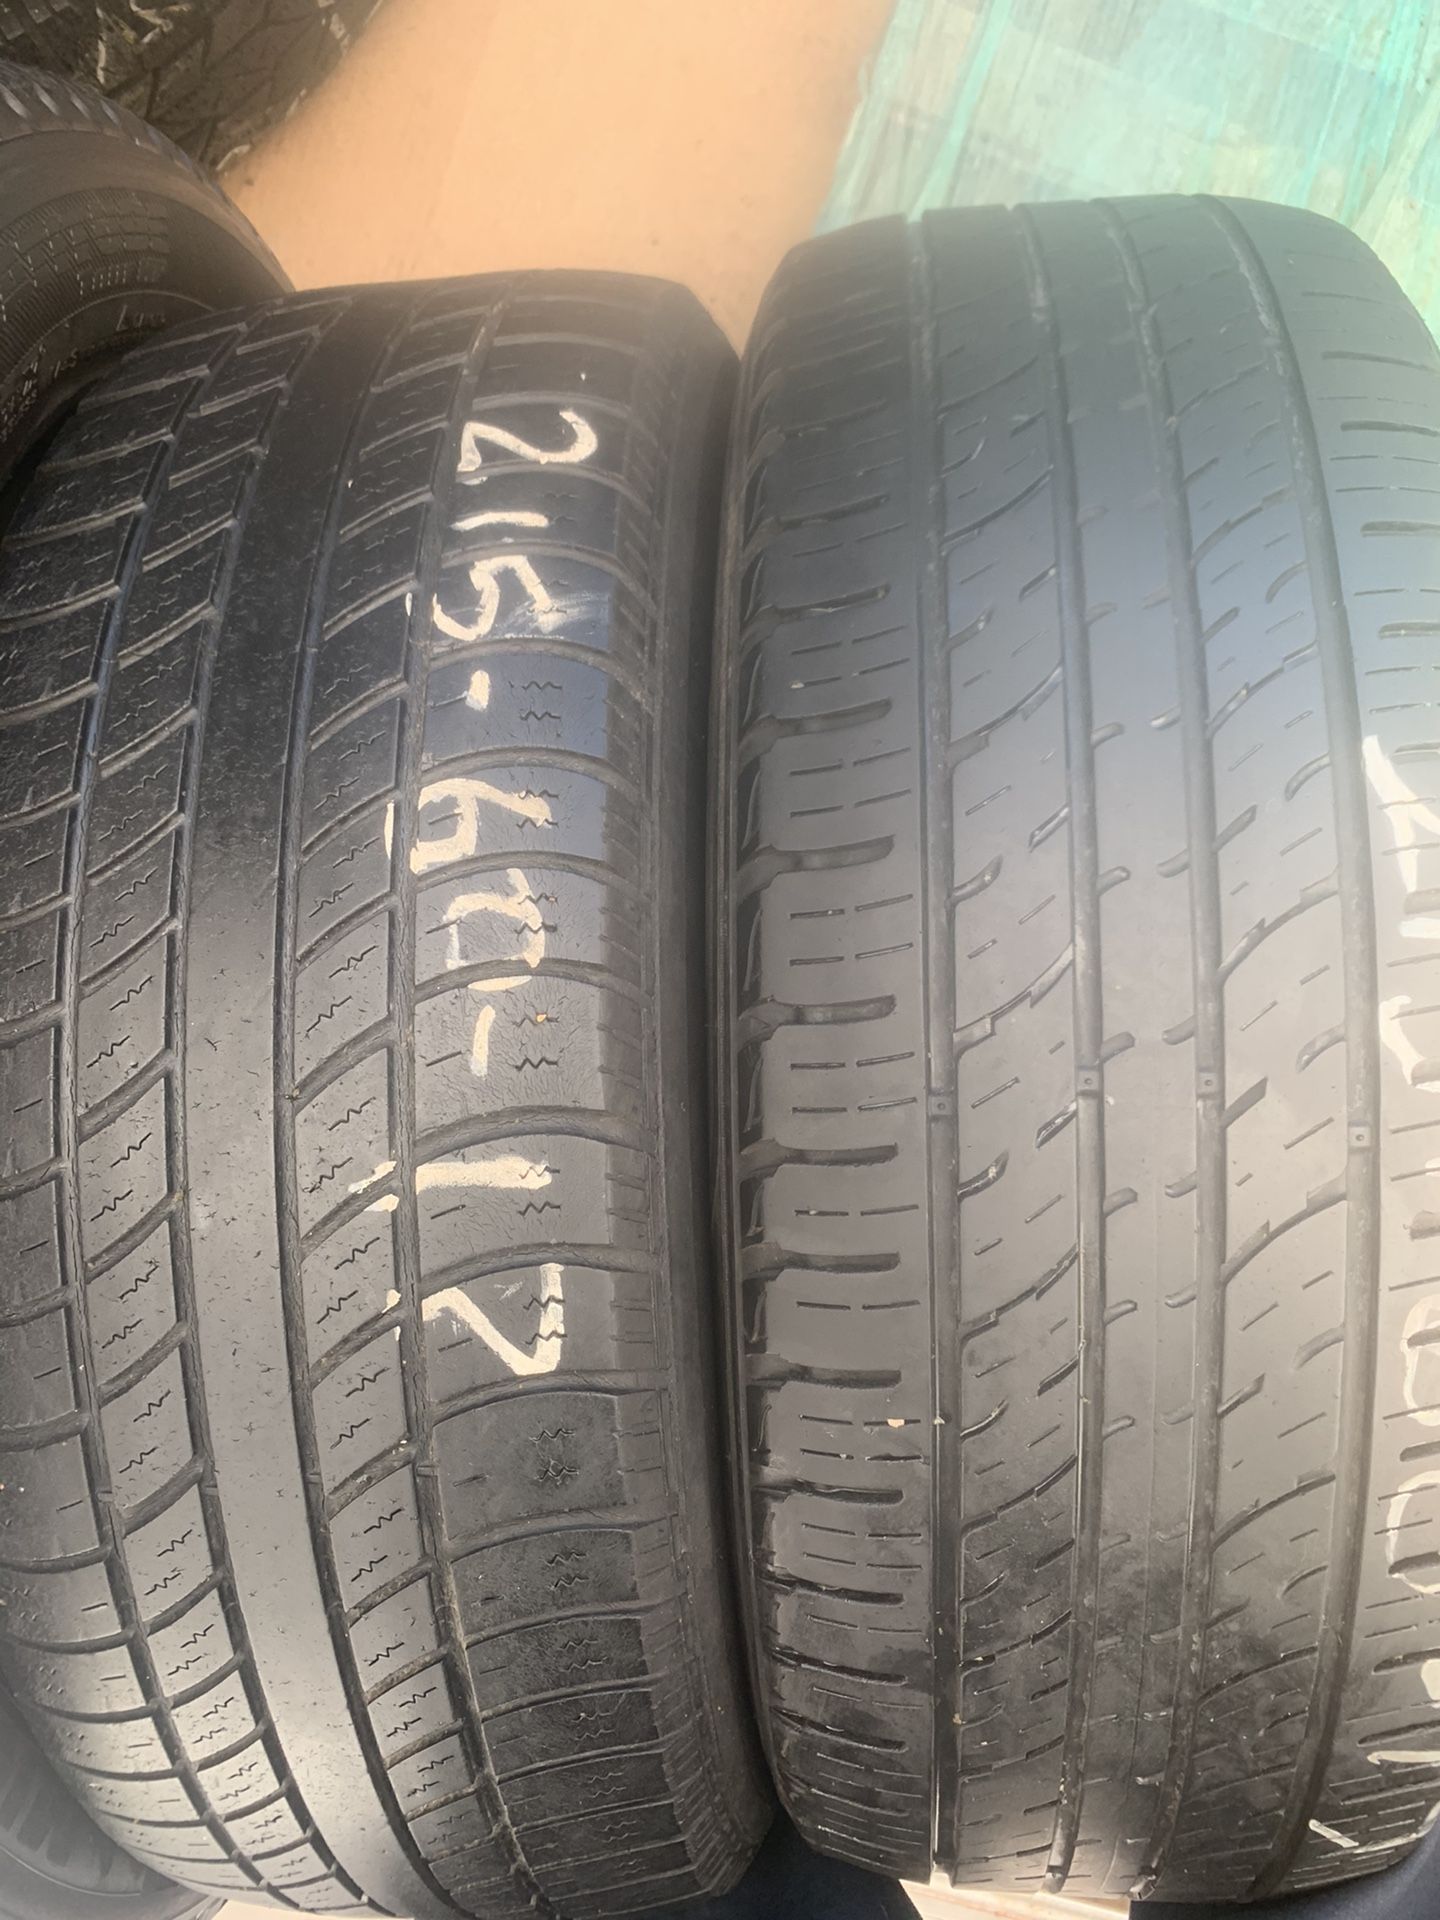 Get both tires for $25